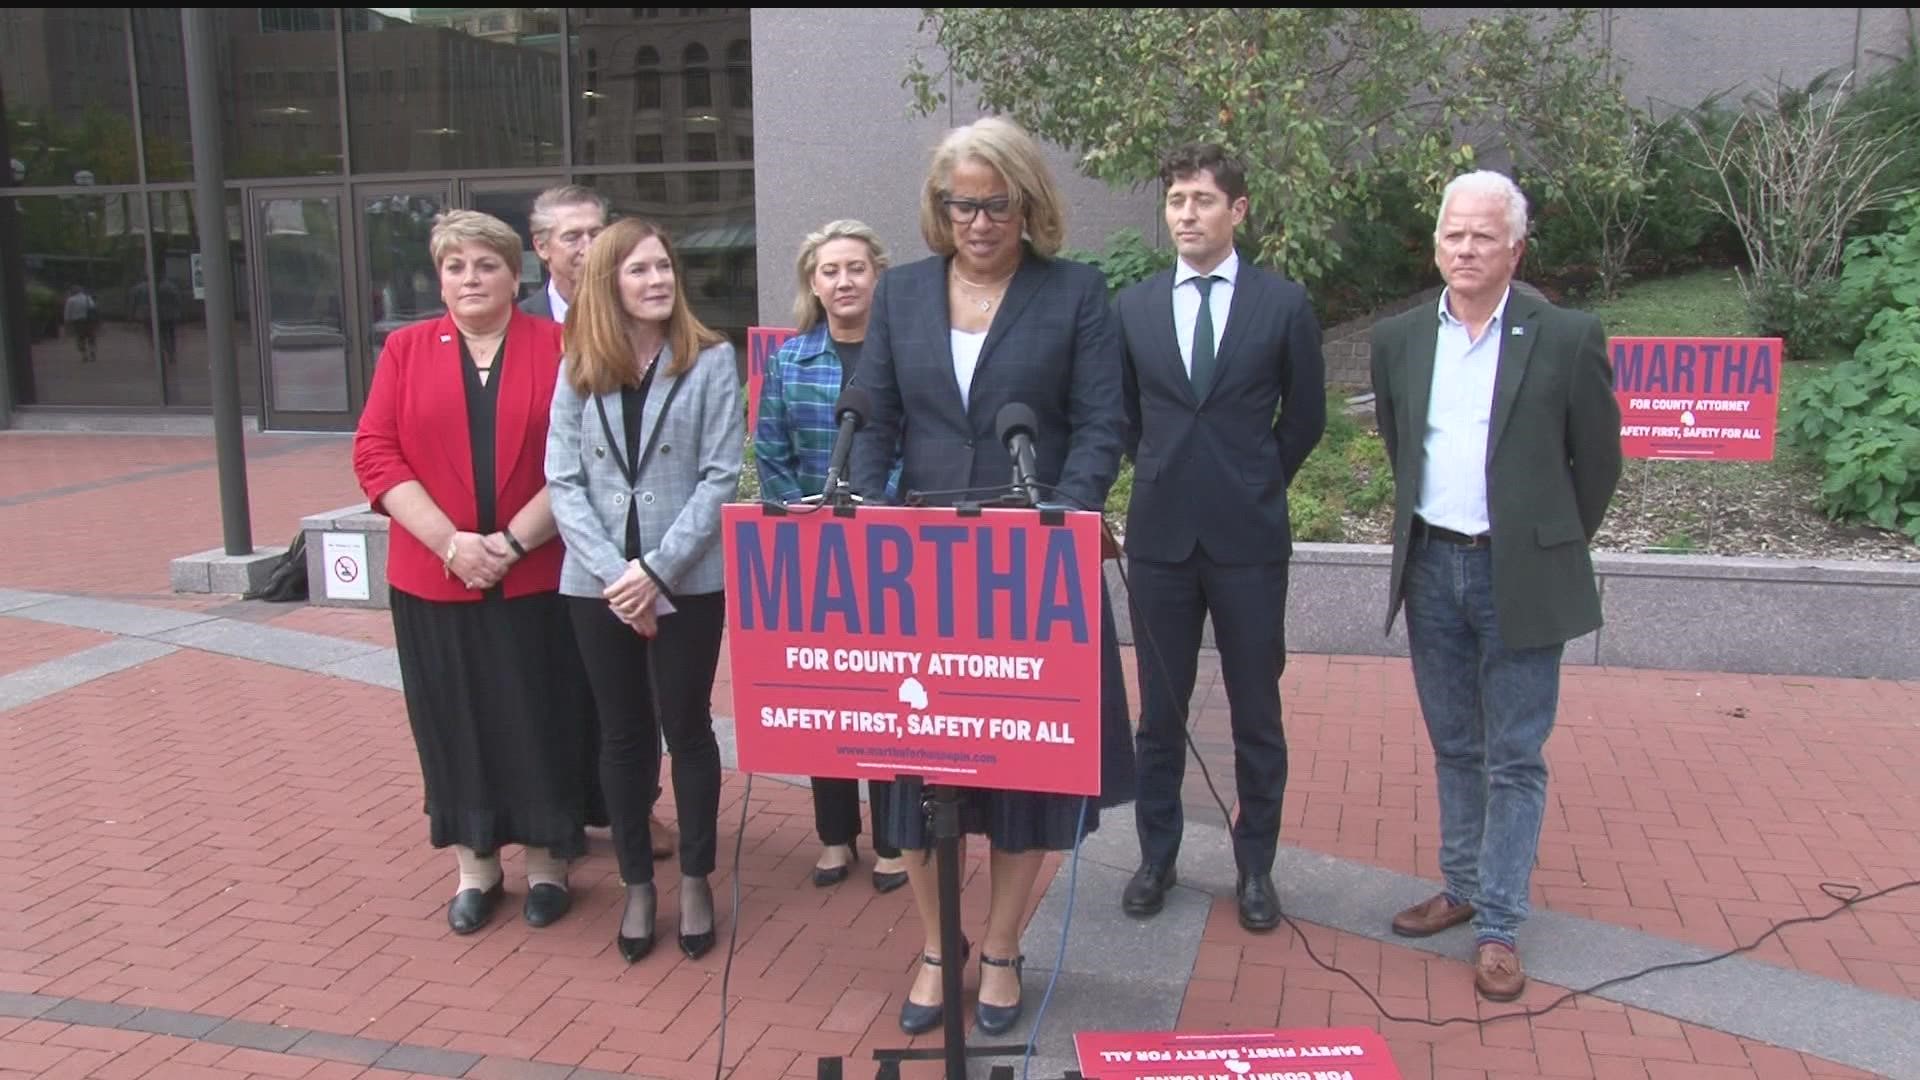 Just weeks away from the midterm election, KARE 11 political reporter John Croman explains why mayors are supporting Martha Holton Dimick.